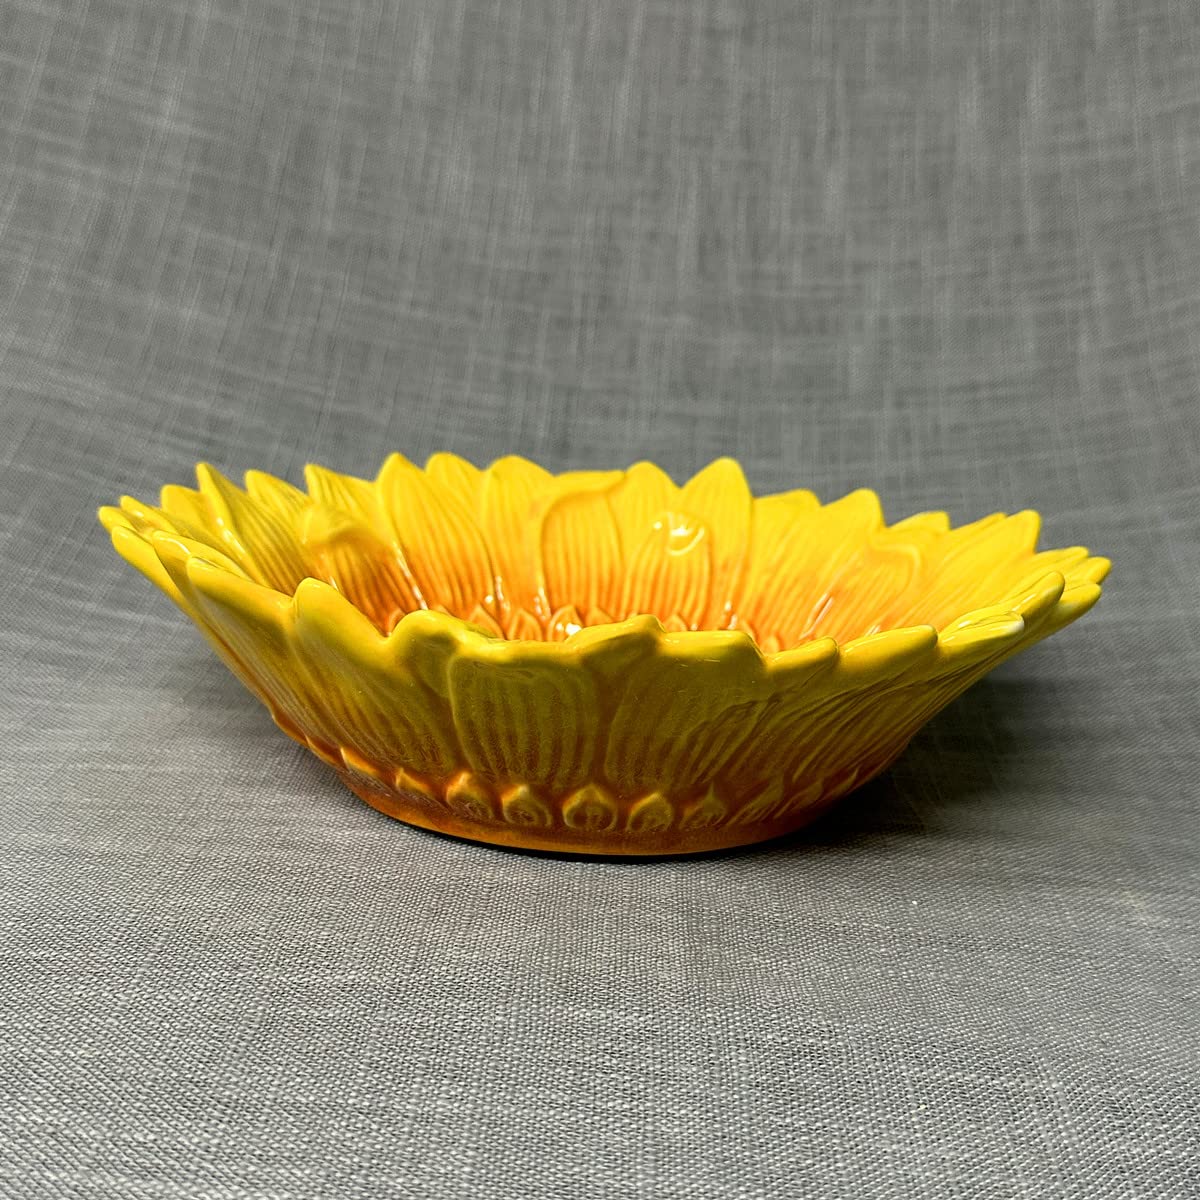 FORLONG Ceramic Medium Fruit Bowl Dessert Cake Candy Snack Plate, Hand Painted Sunflower-shaped Decorative Bowl, Art Tabletop Home Décor -10.8inches